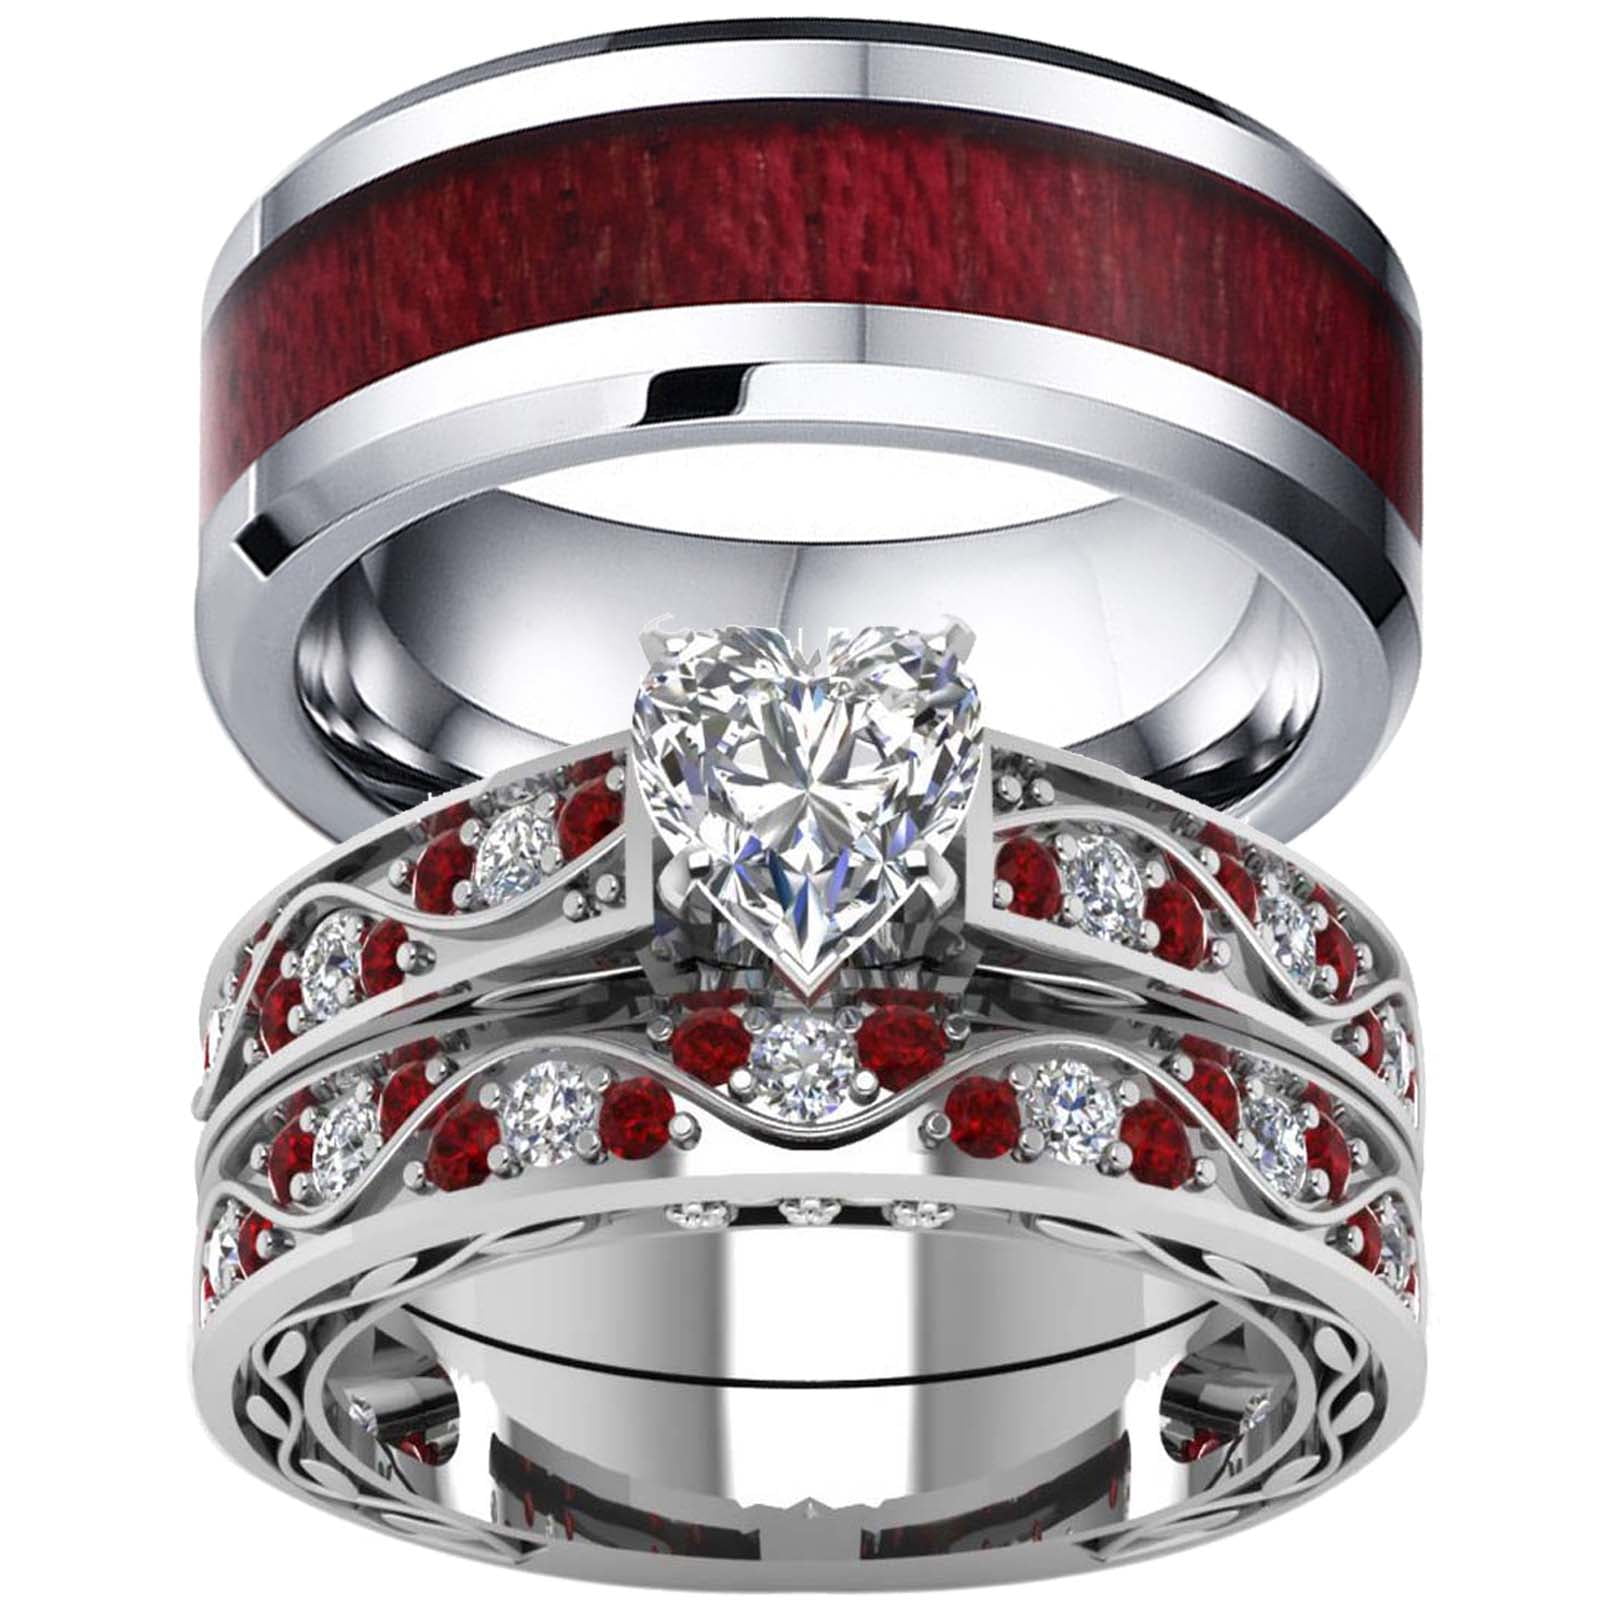 What makes the Elegant Crystal Stone Solitaire Couple Ring Set so spec